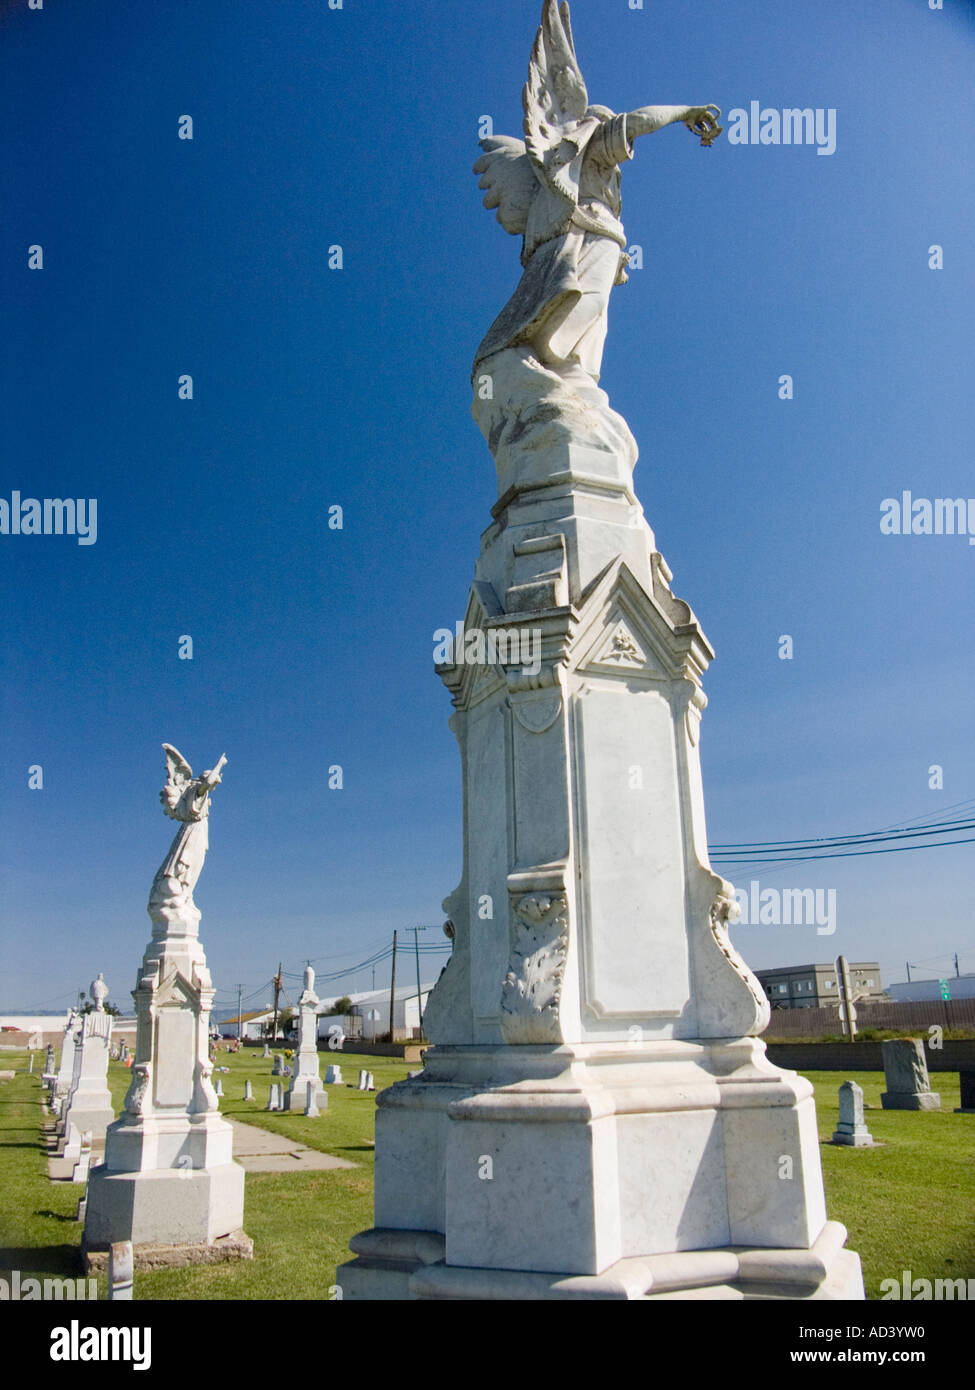 Cemetery statues crucifixes Stock Photo